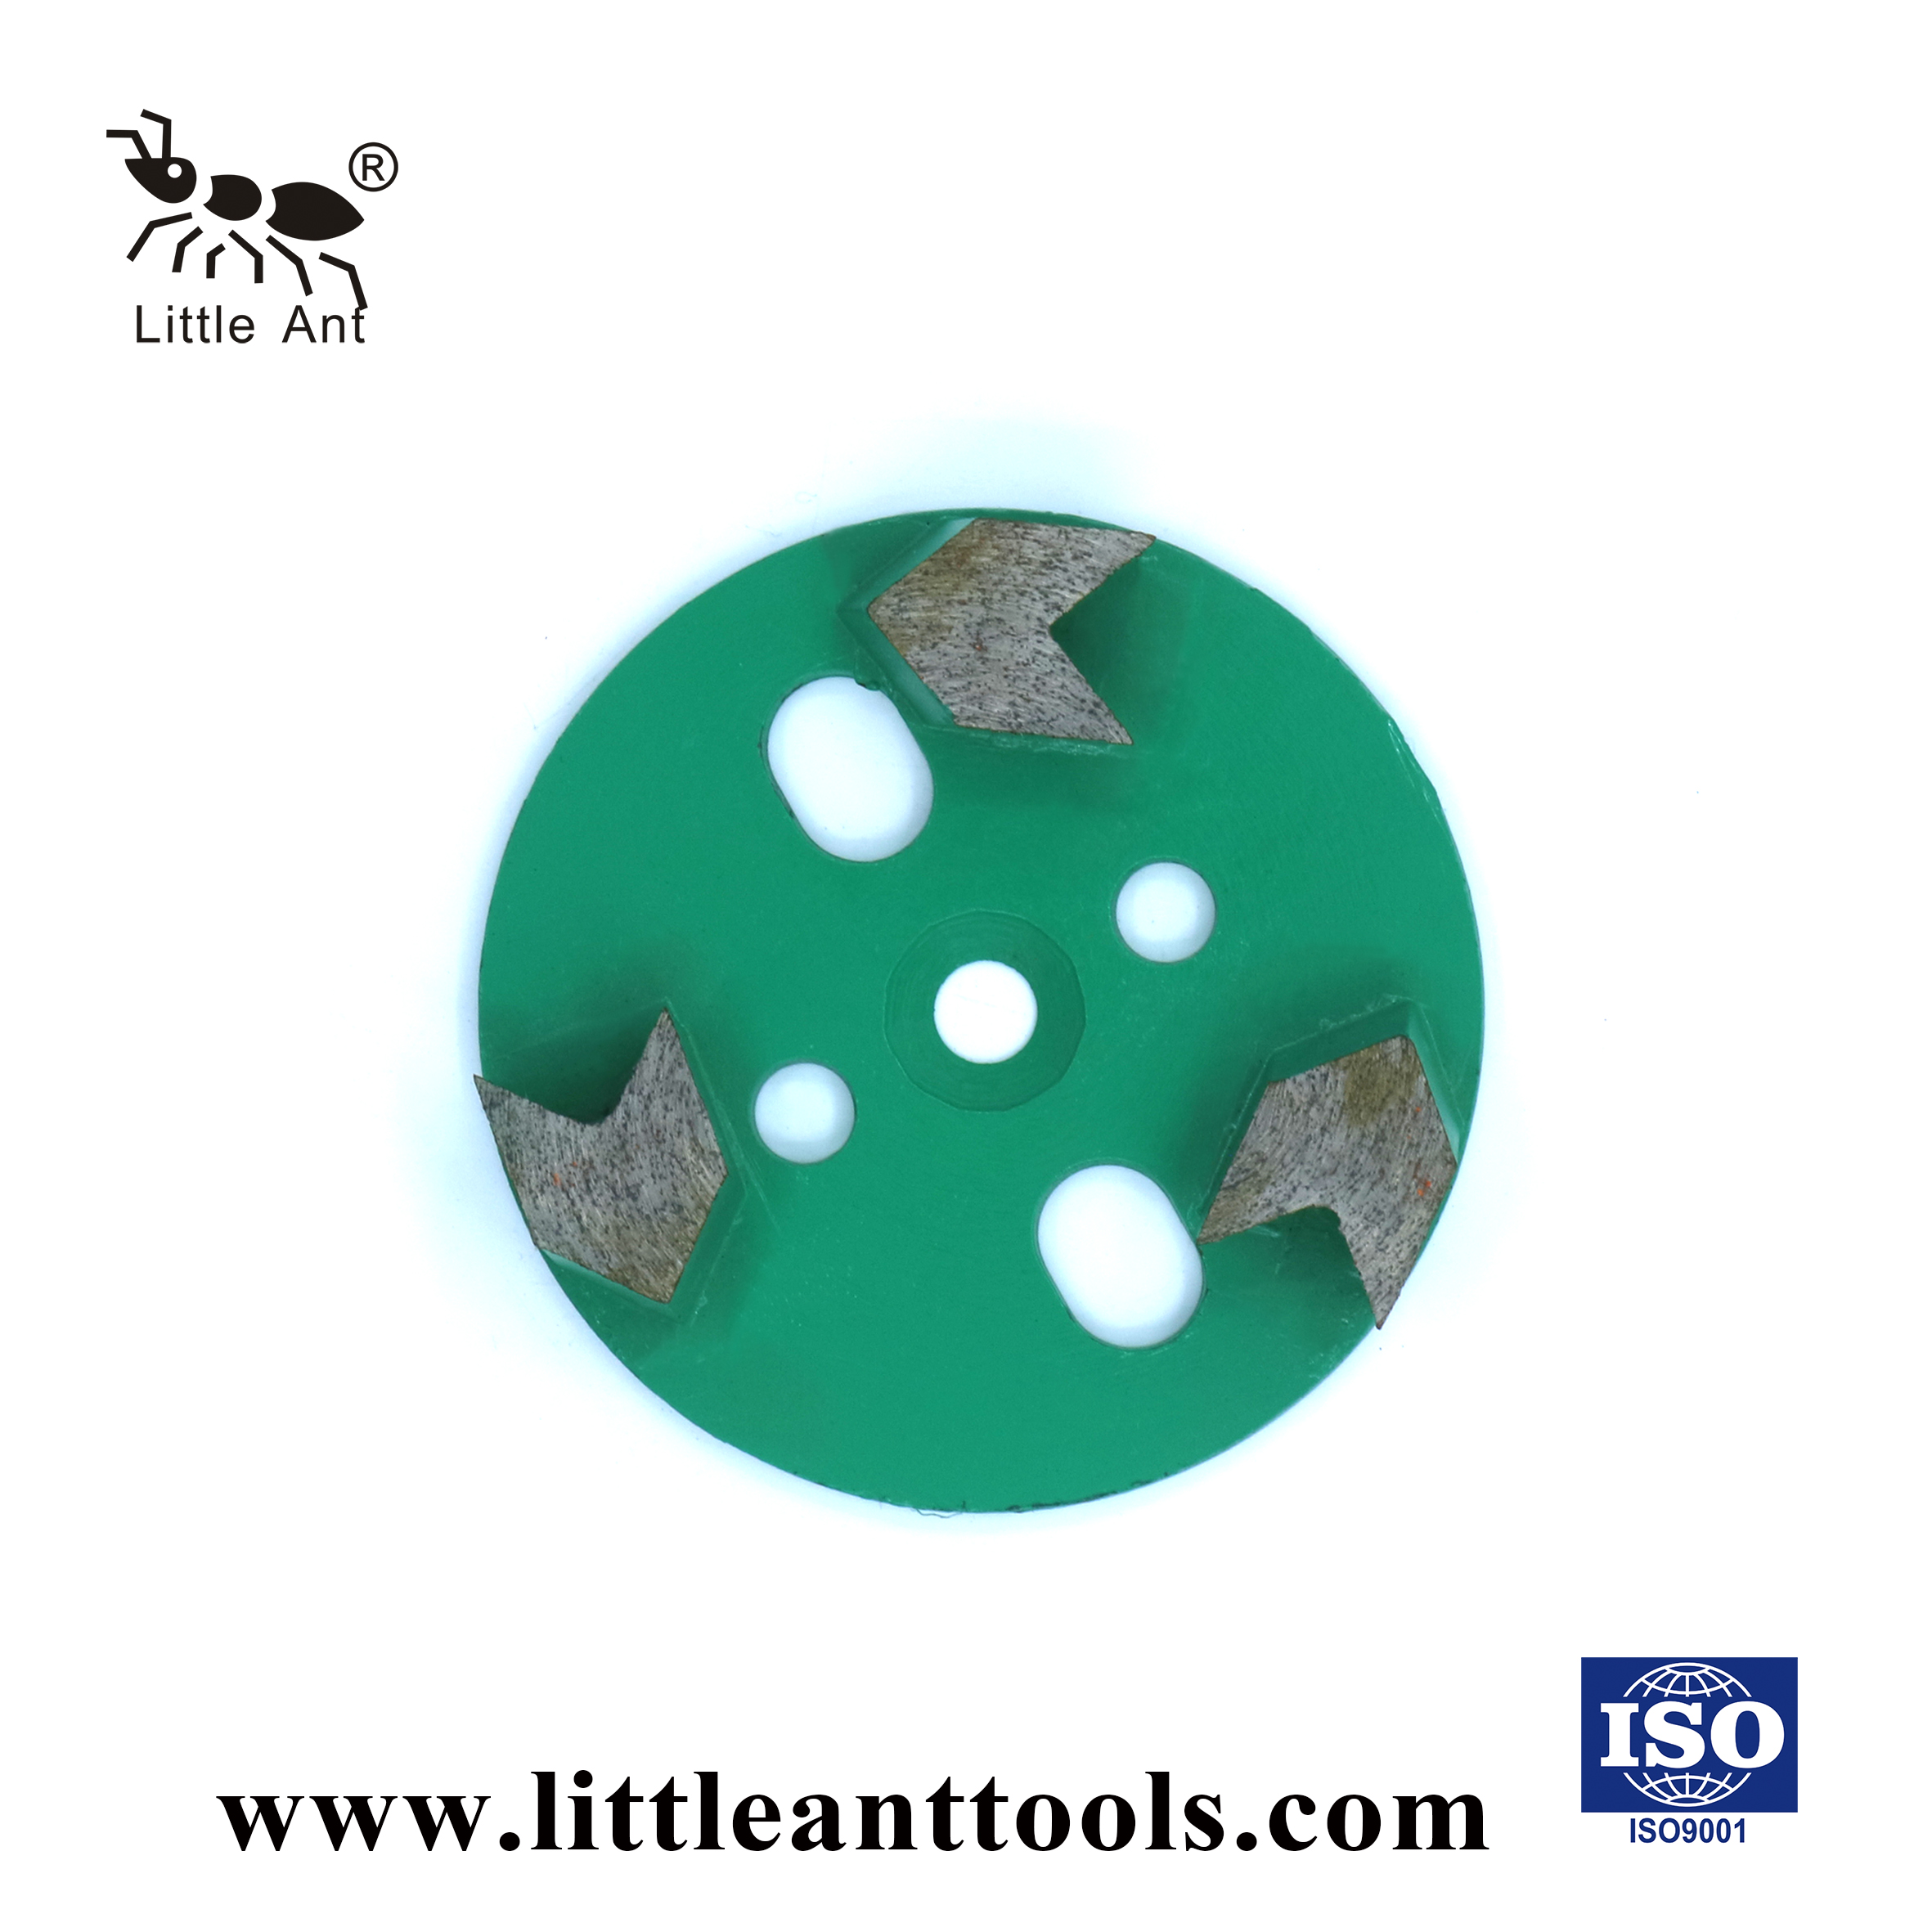 LITTLE ANT 4-inch Circular Grinding Plate Metal Disc Tool for Concrete Dry And Wet Use 3 Arrow Type Sgements 100mm